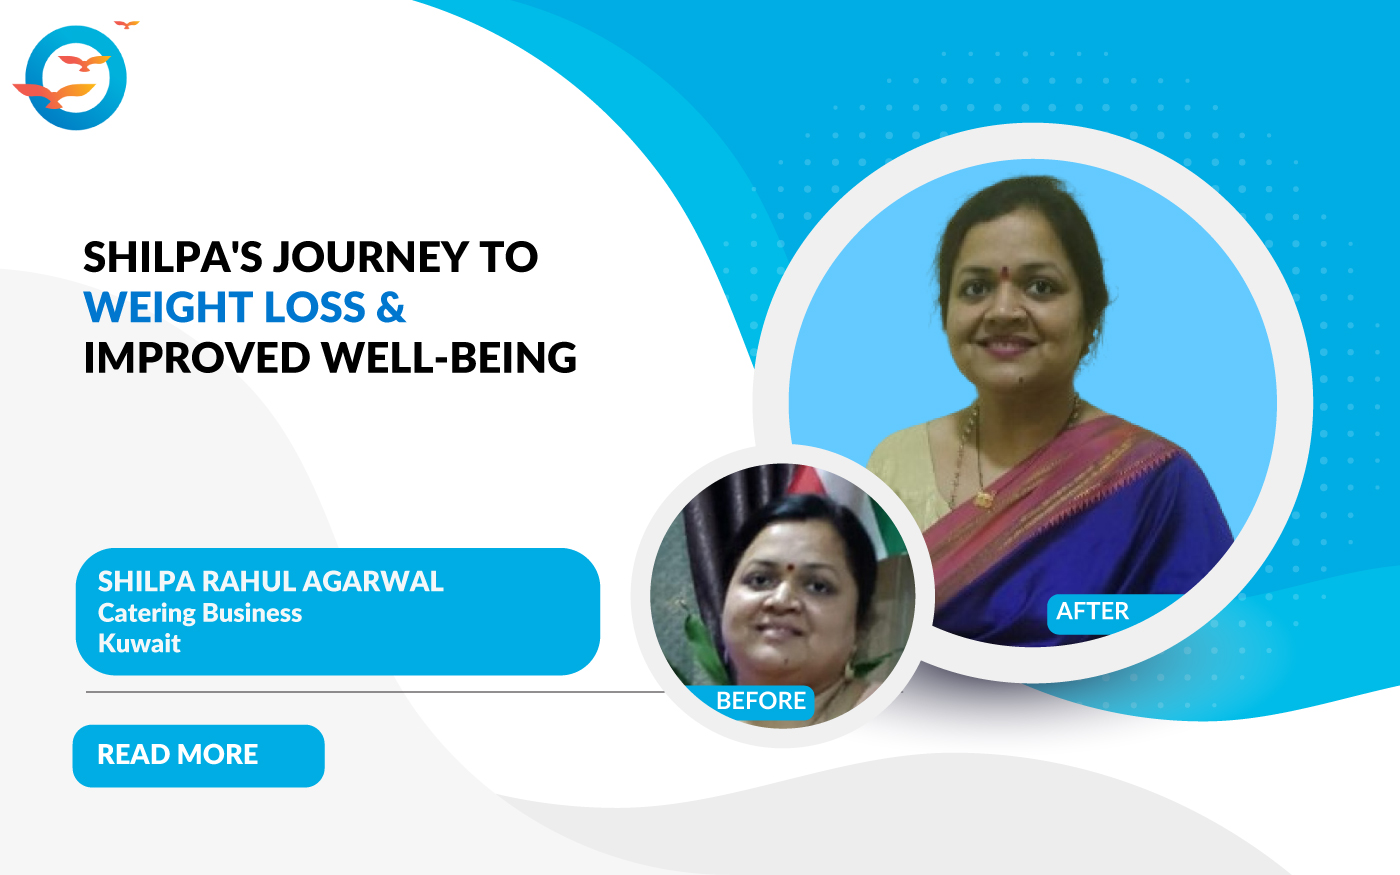 Shilpa's Journey to Weight Loss & Improved Well-Being